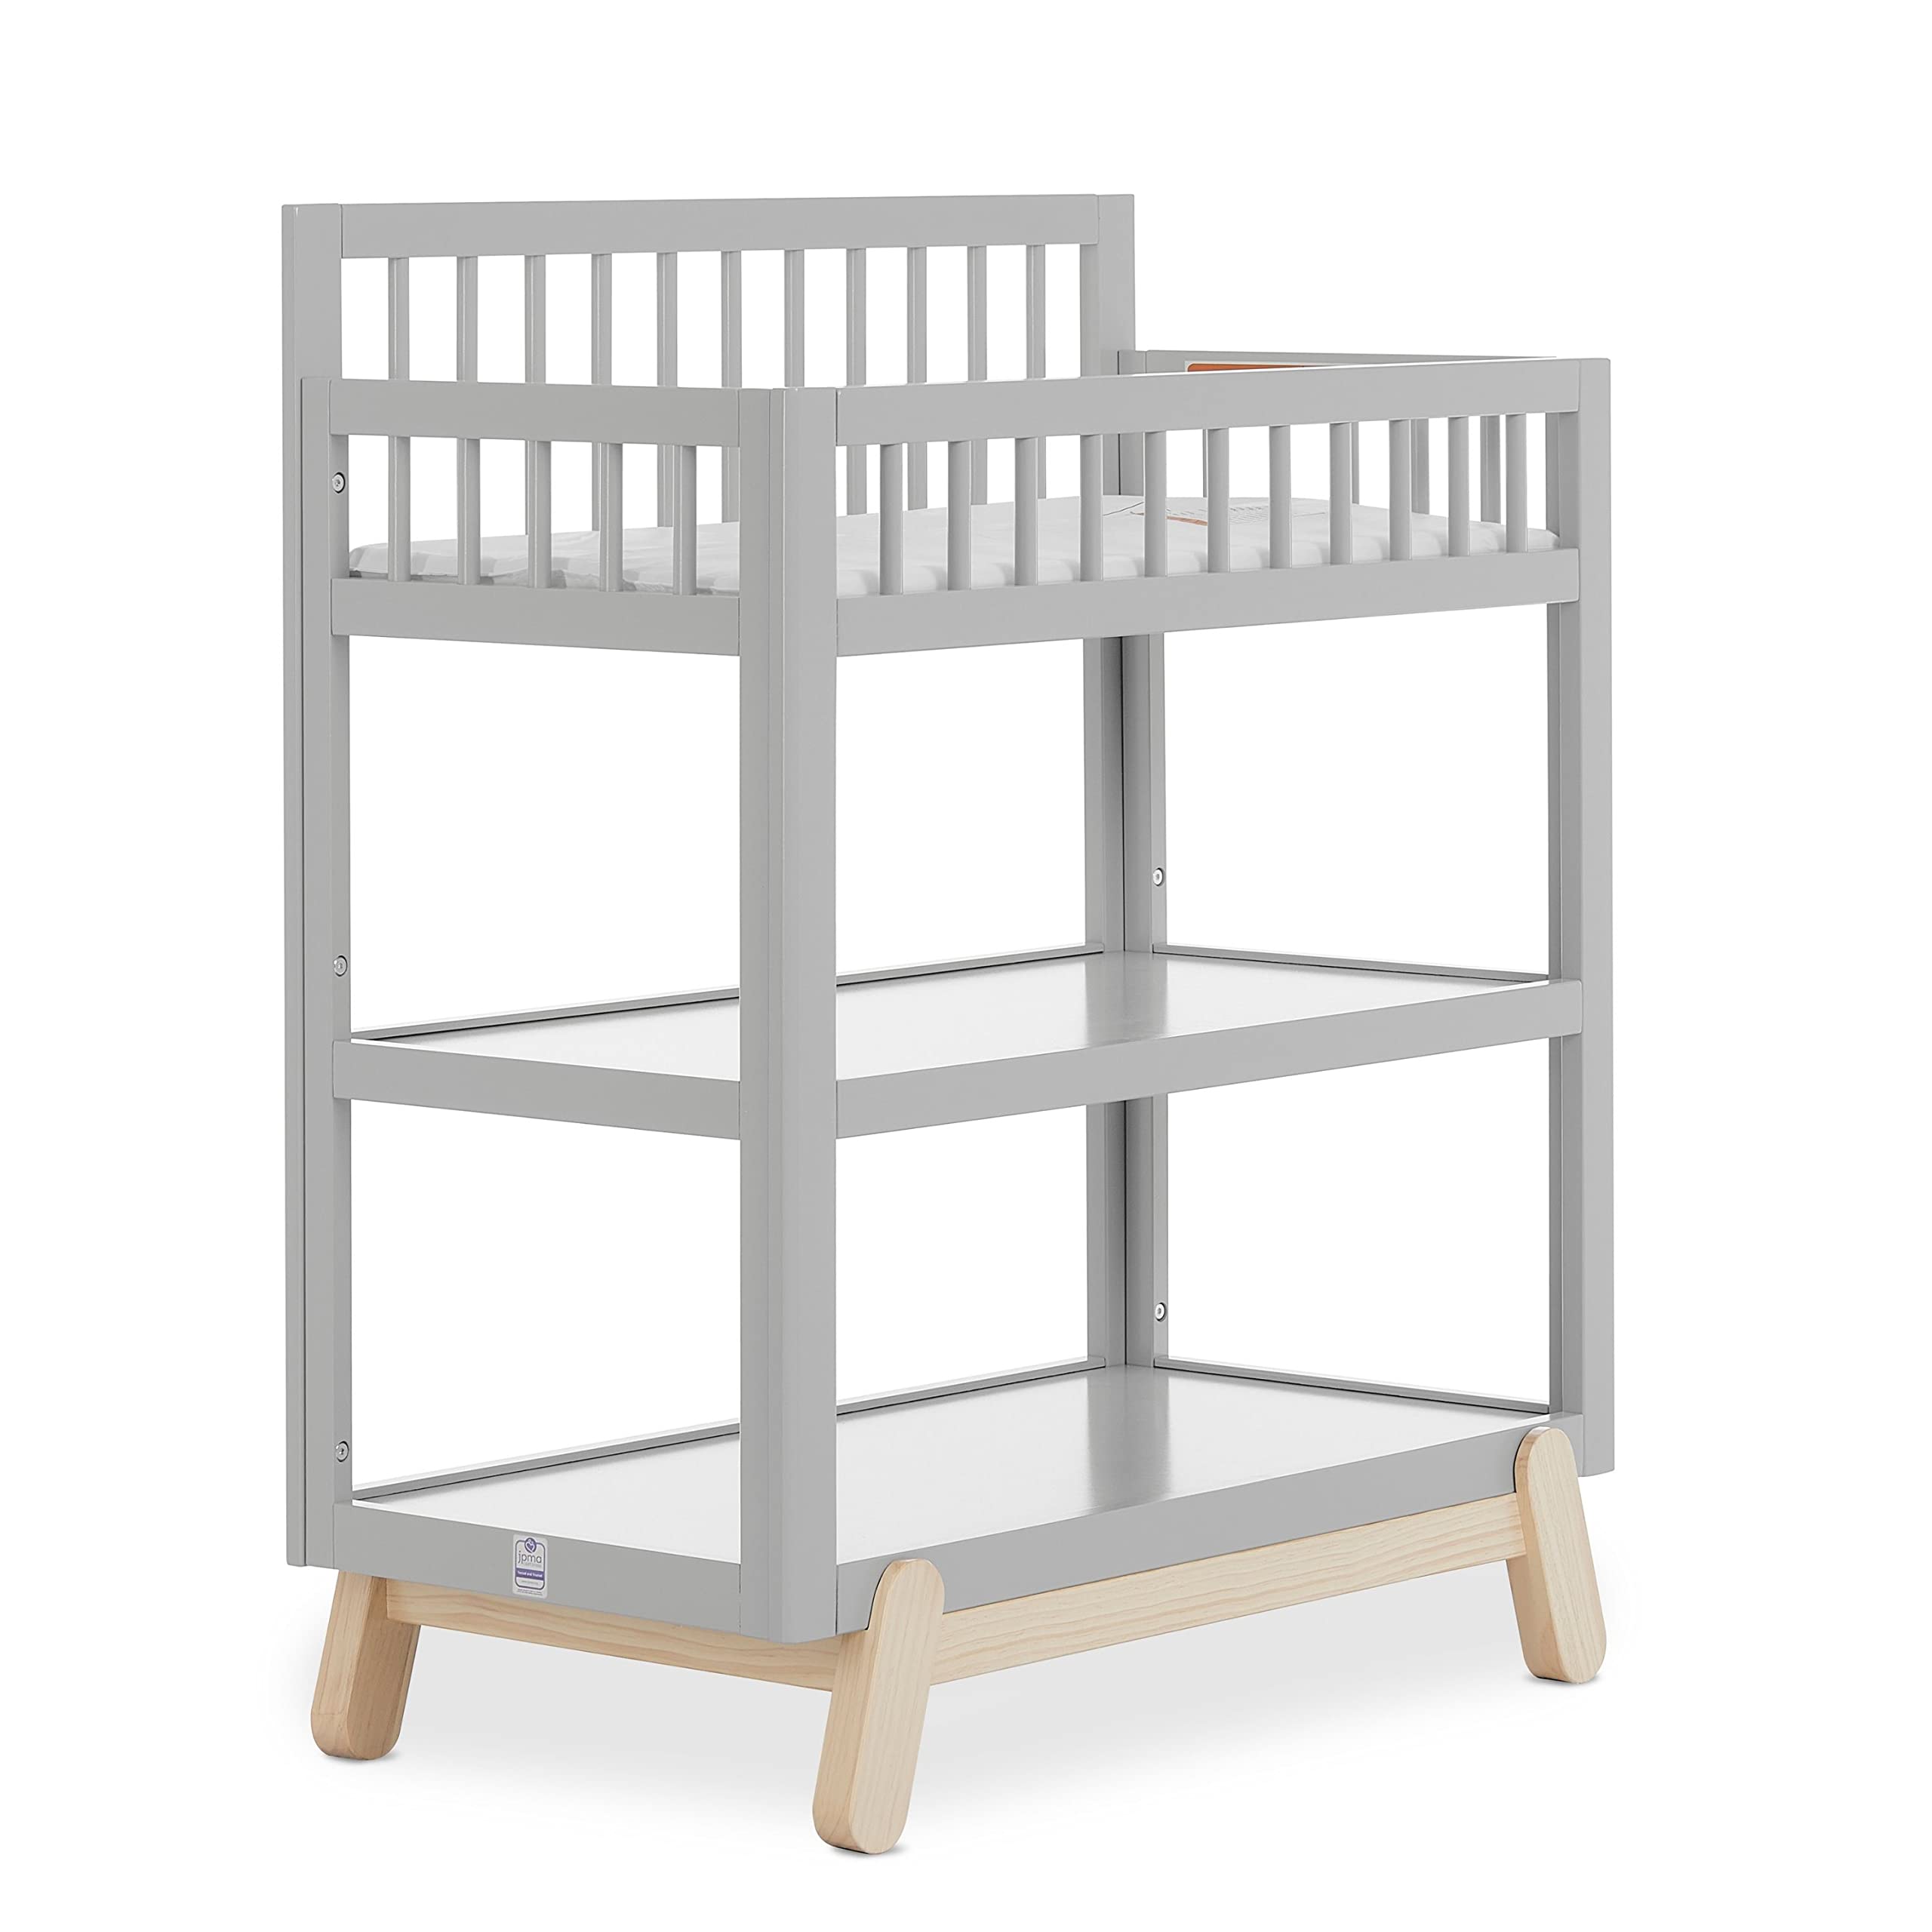 Dream On Me Hygge Changing Table in Pebble Grey Oak, Greenguard Gold & JPMA Certified, Comes with Safety Belts & 1” Changing Pad, Easy to Clean, Safe Wooden Furniture